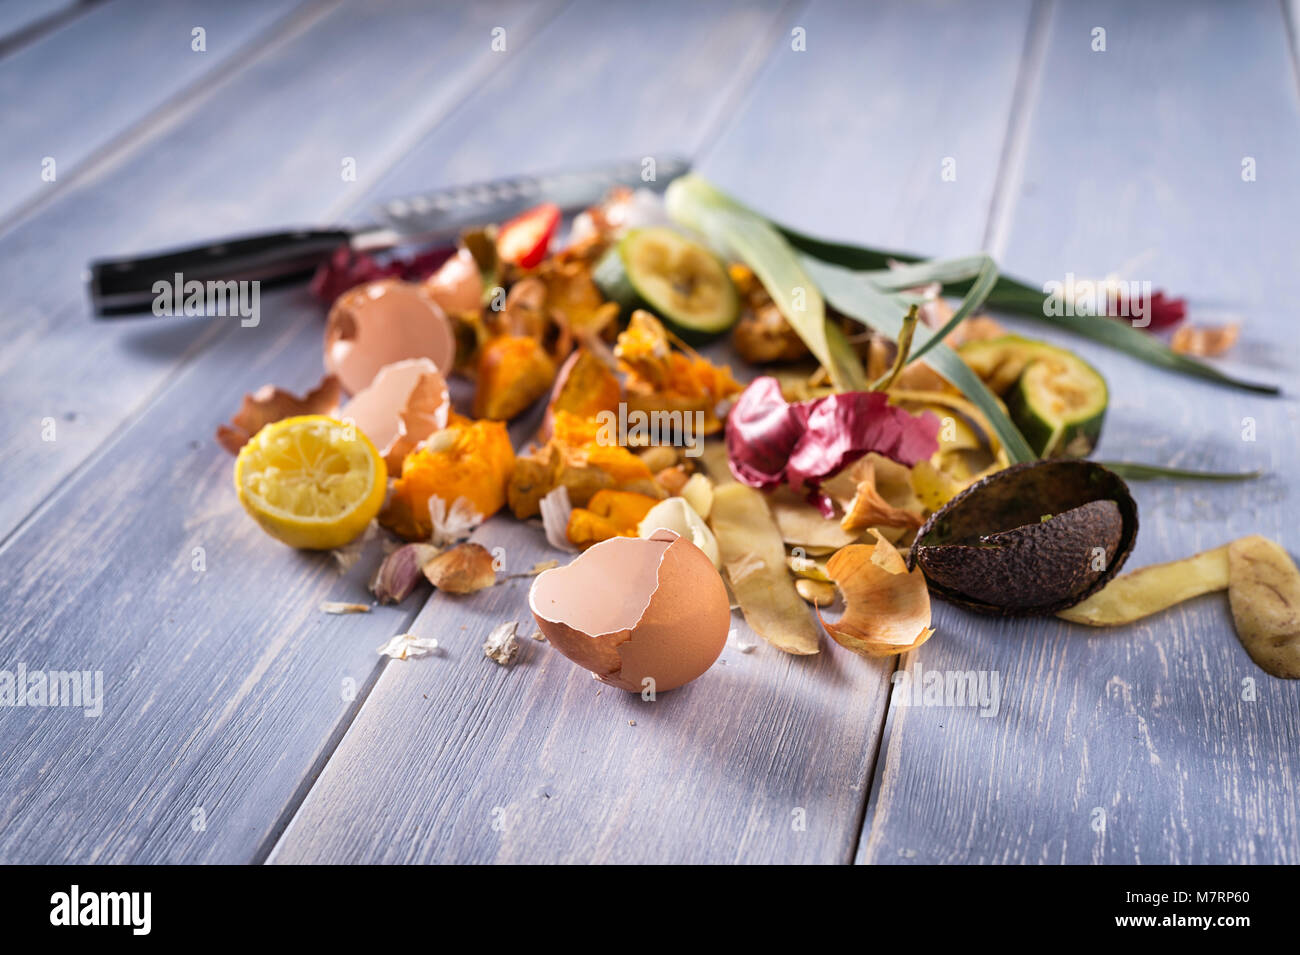 Organic leftovers, kitchen scraps, waste from vegetable ready for recycling and to compost. Collecting food leftovers for composting. Environmentally  Stock Photo